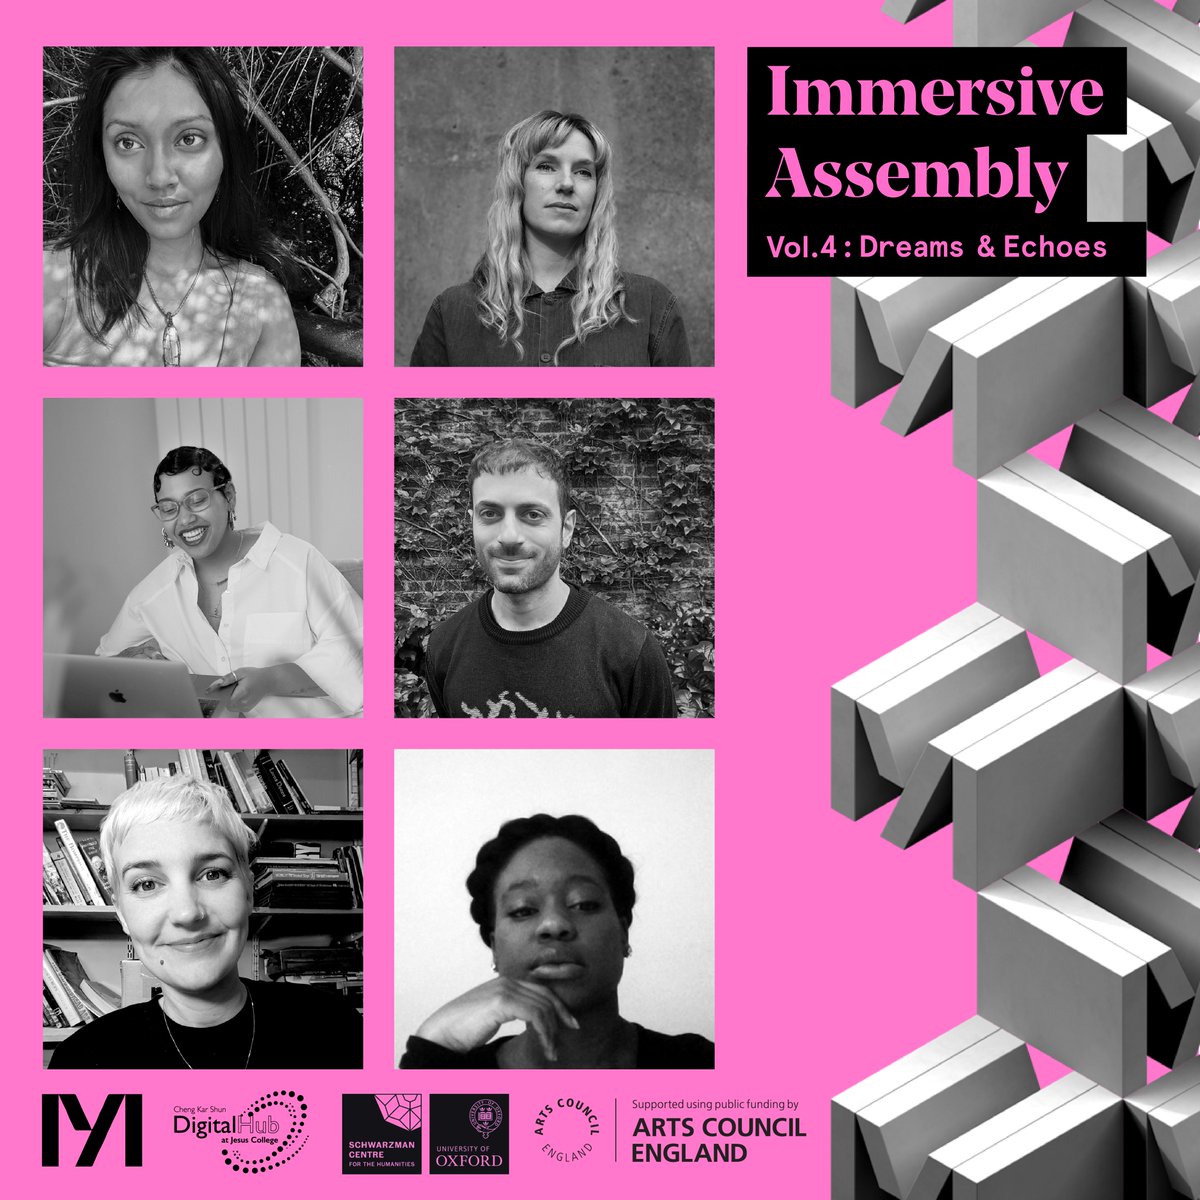 Thrilled to announce the new cohort of creatives for #ImmersiveAssembly Vol 4, bringing together emerging digital artists to explore Dreams & Echoes Supported by @oxfordculturalprog @JesusOxford @ace_national